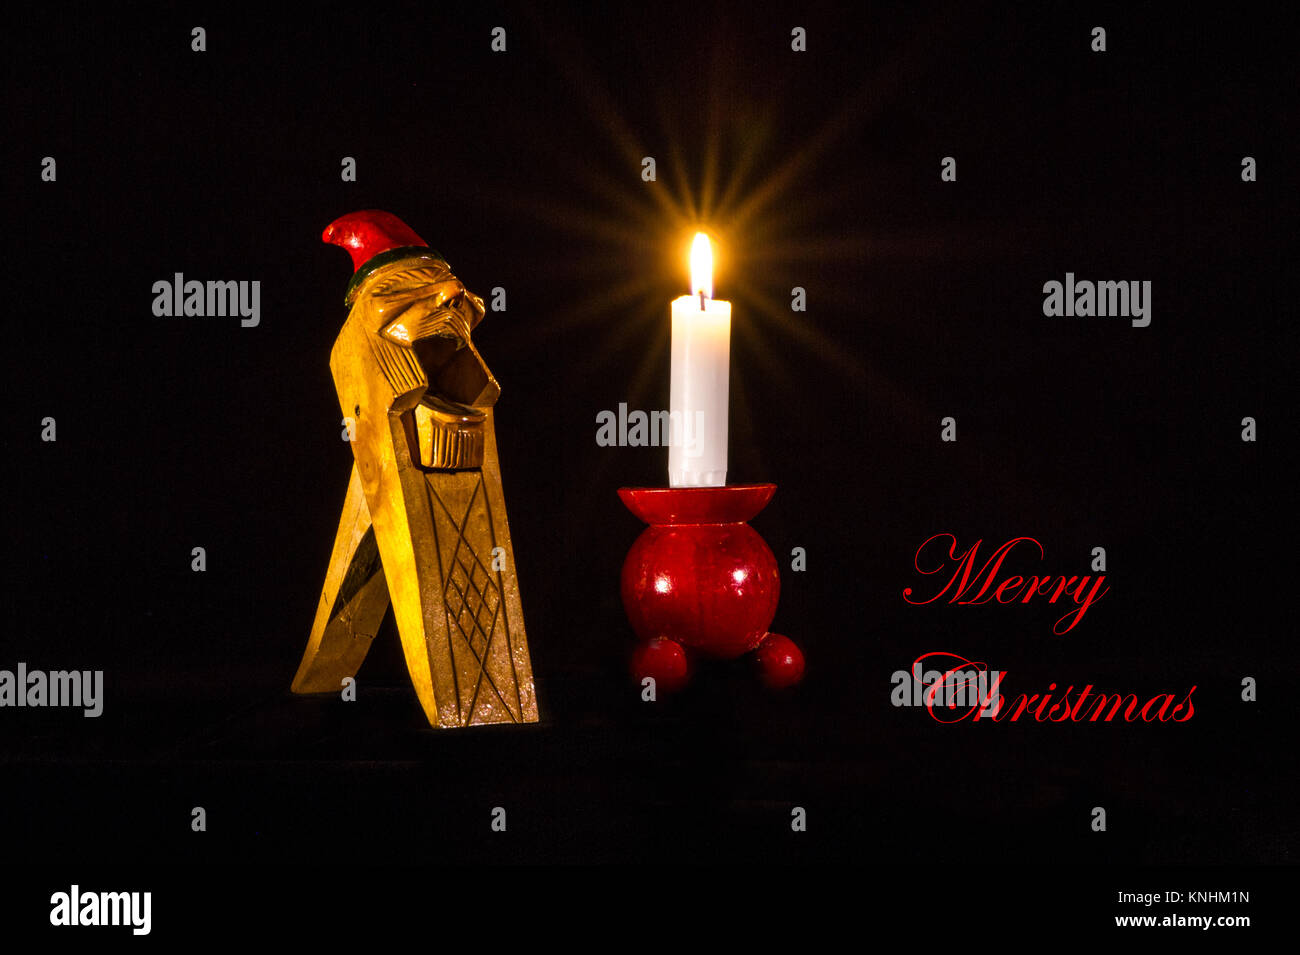 Christmas greetings in English on a Norwegian Gnome Handcarved Wooden Nut Cracker, together with a candlelight on a typical red wooden candlestick. Stock Photo